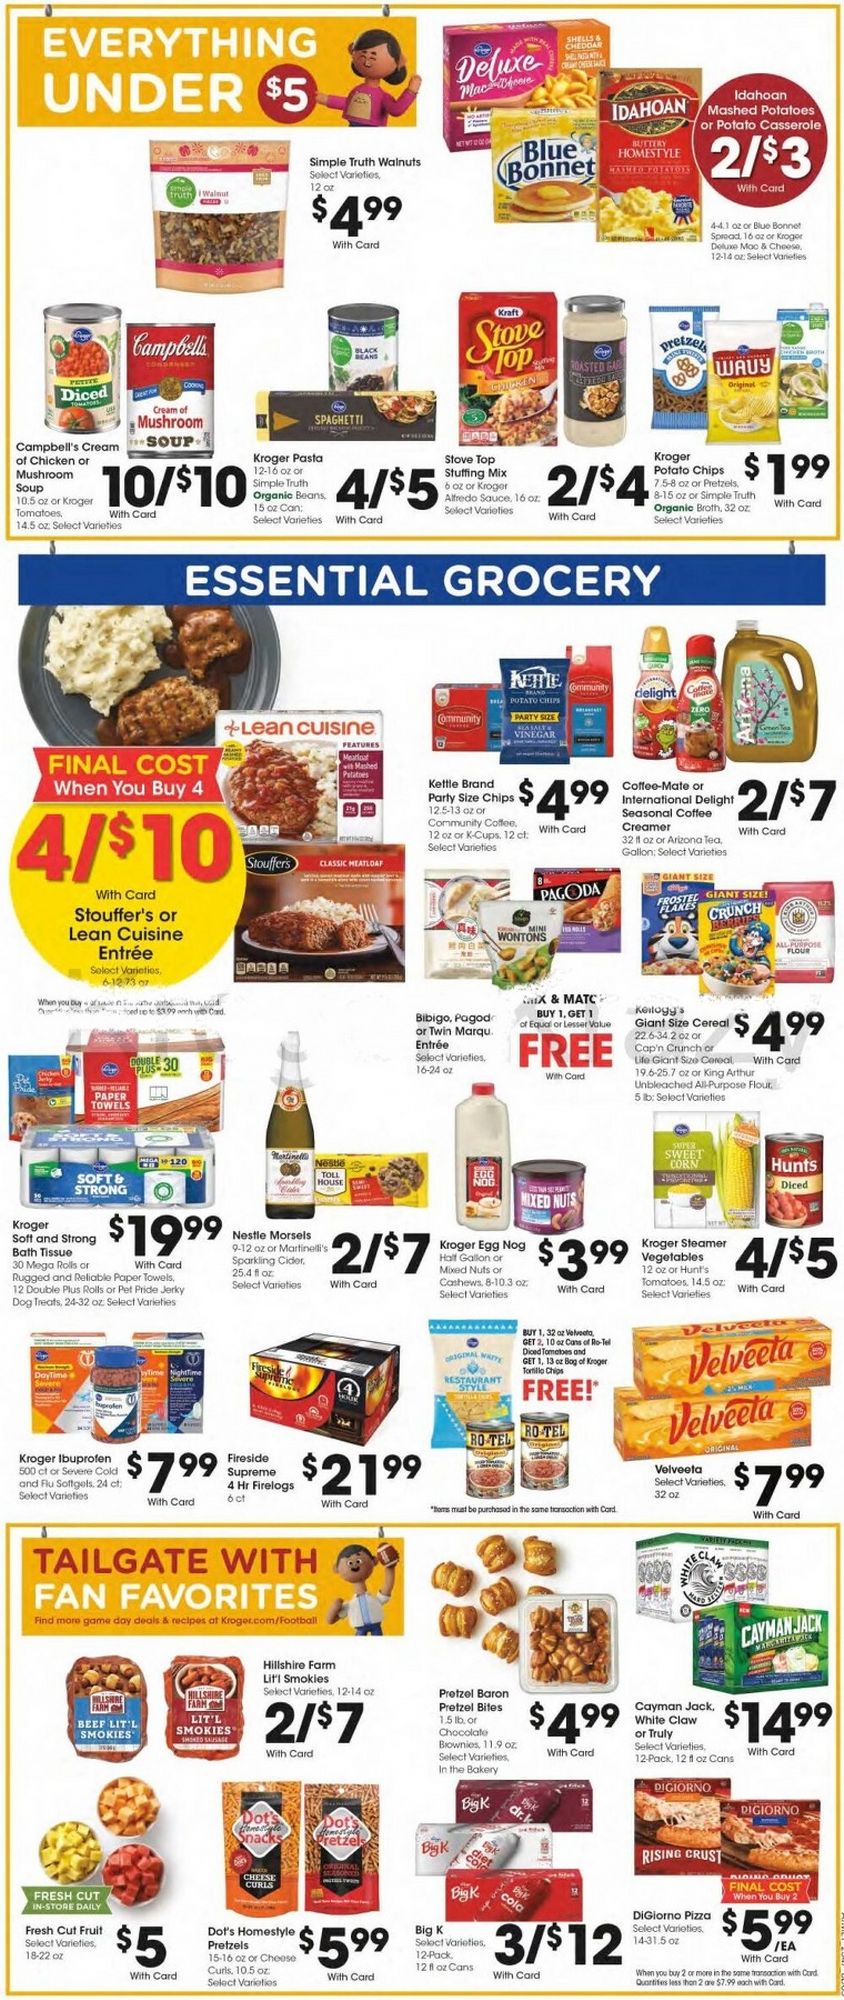 Kroger Christmas July 2024 Weekly Sales, Deals, Discounts and Digital Coupons.